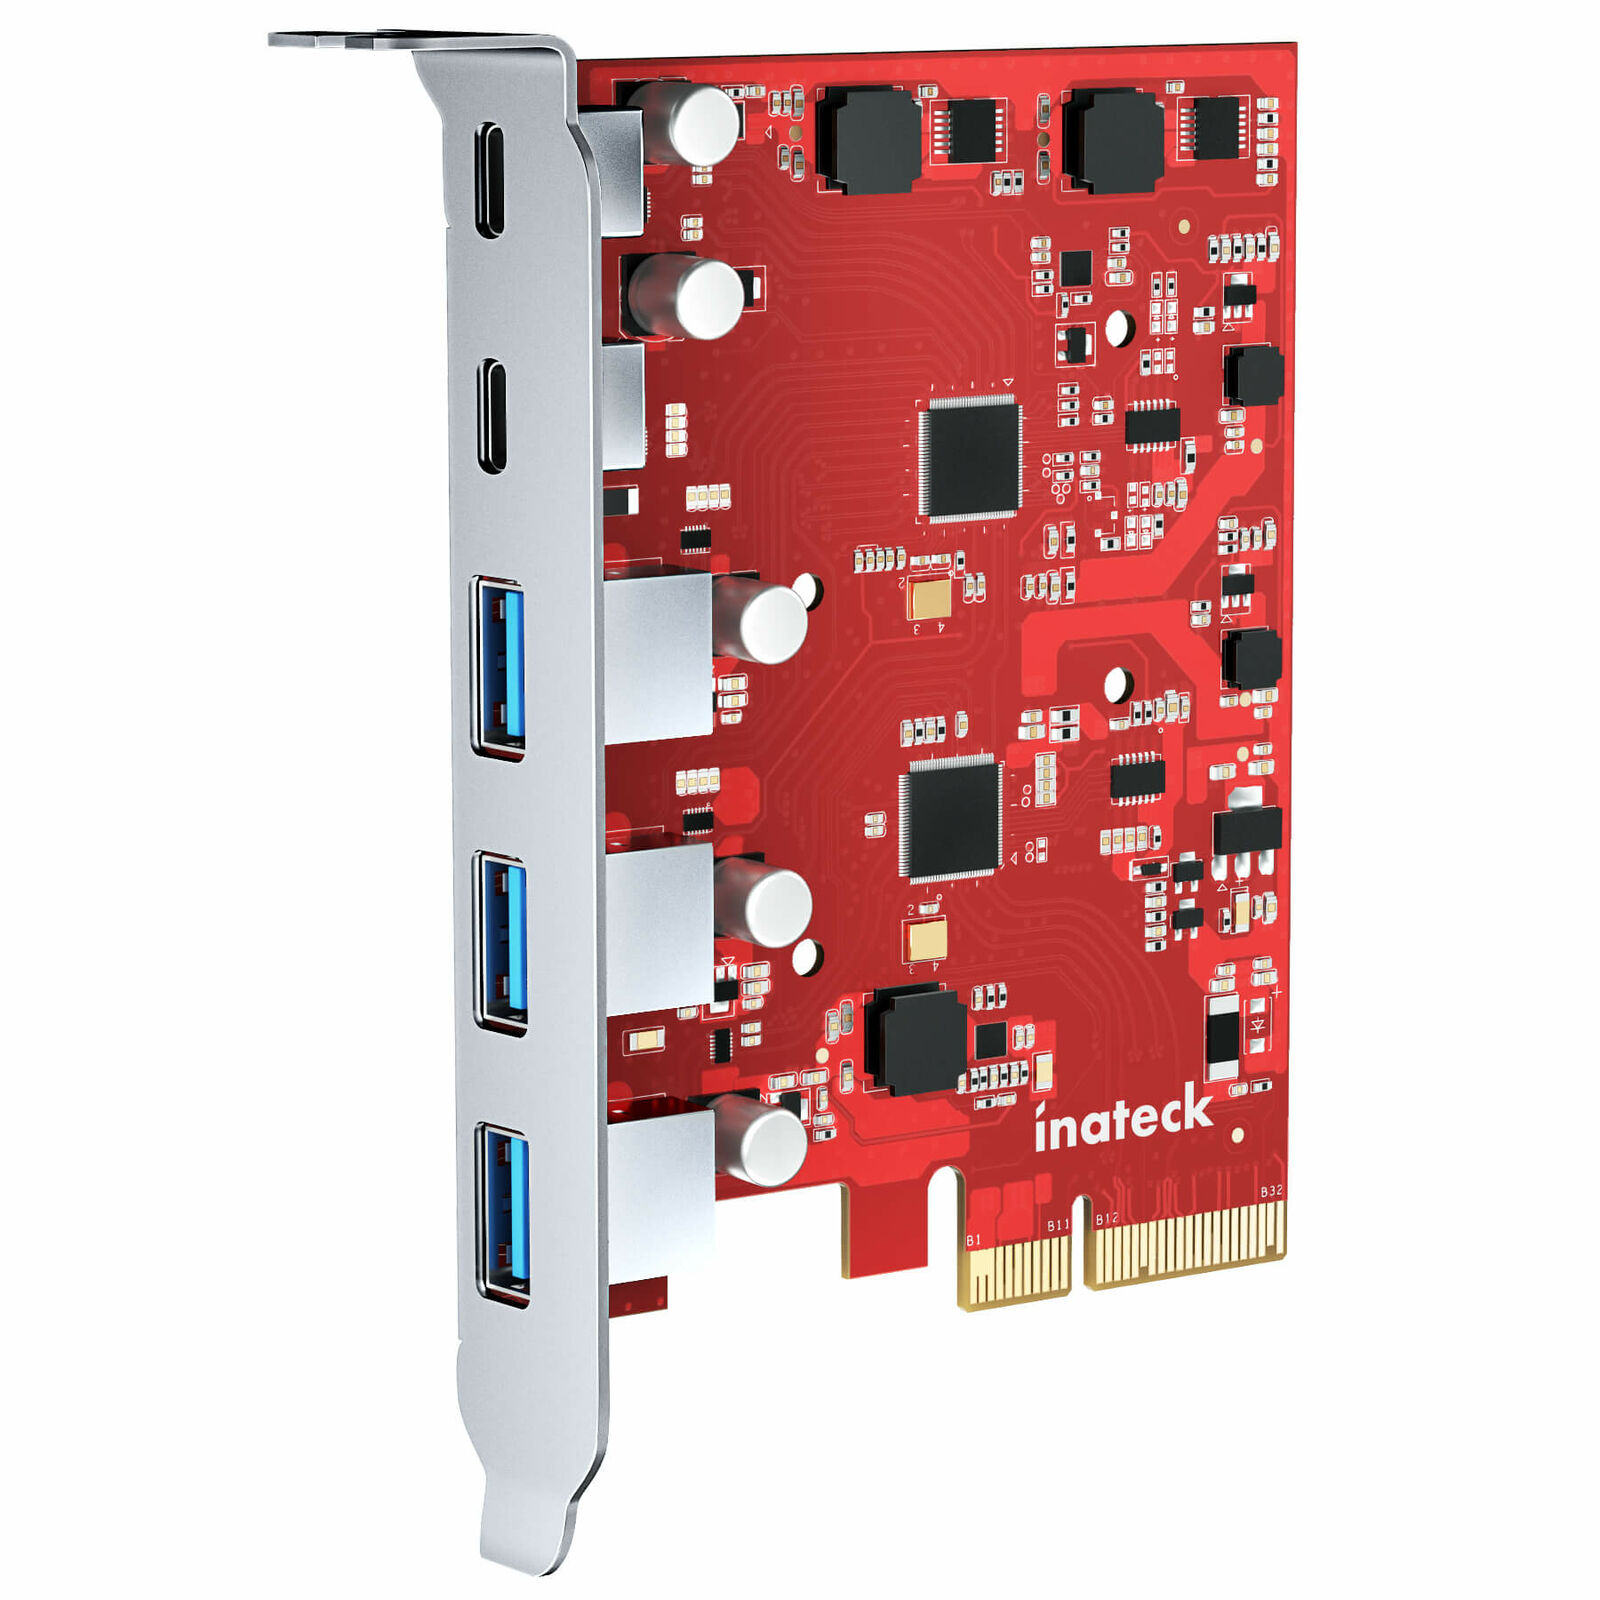 Inateck PCIe to USB 3.2 Gen 2 Expansion Card Express Card 20 Gbps Superspeed